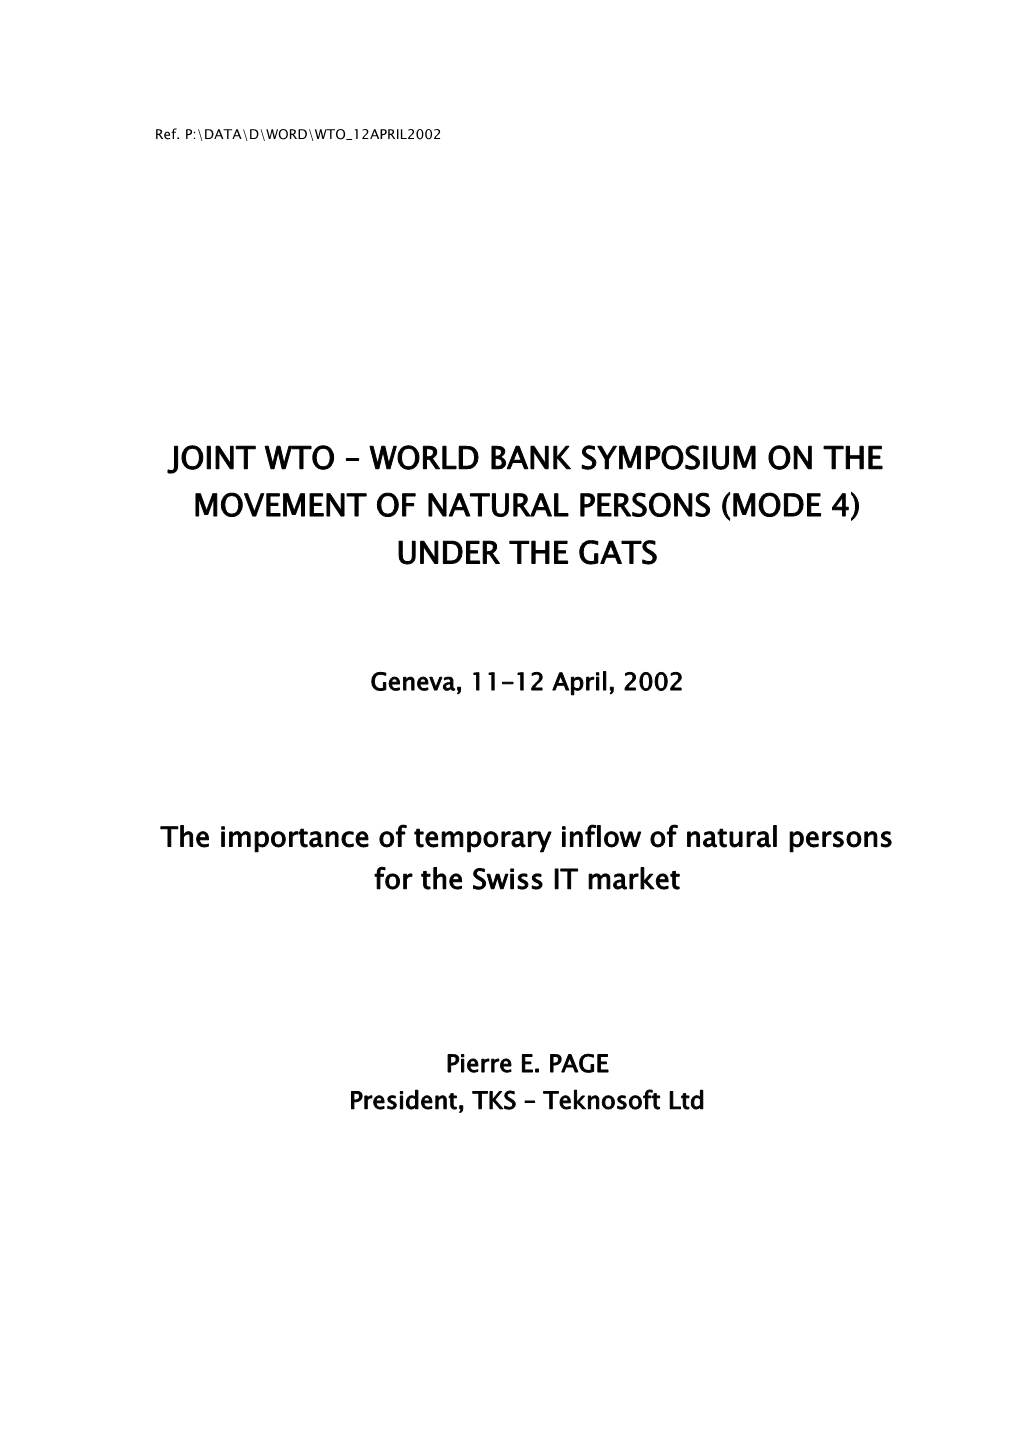 Joint Wto World Bank Symposium on the Movement of Natural Persons (Mode 4) Under the Gats